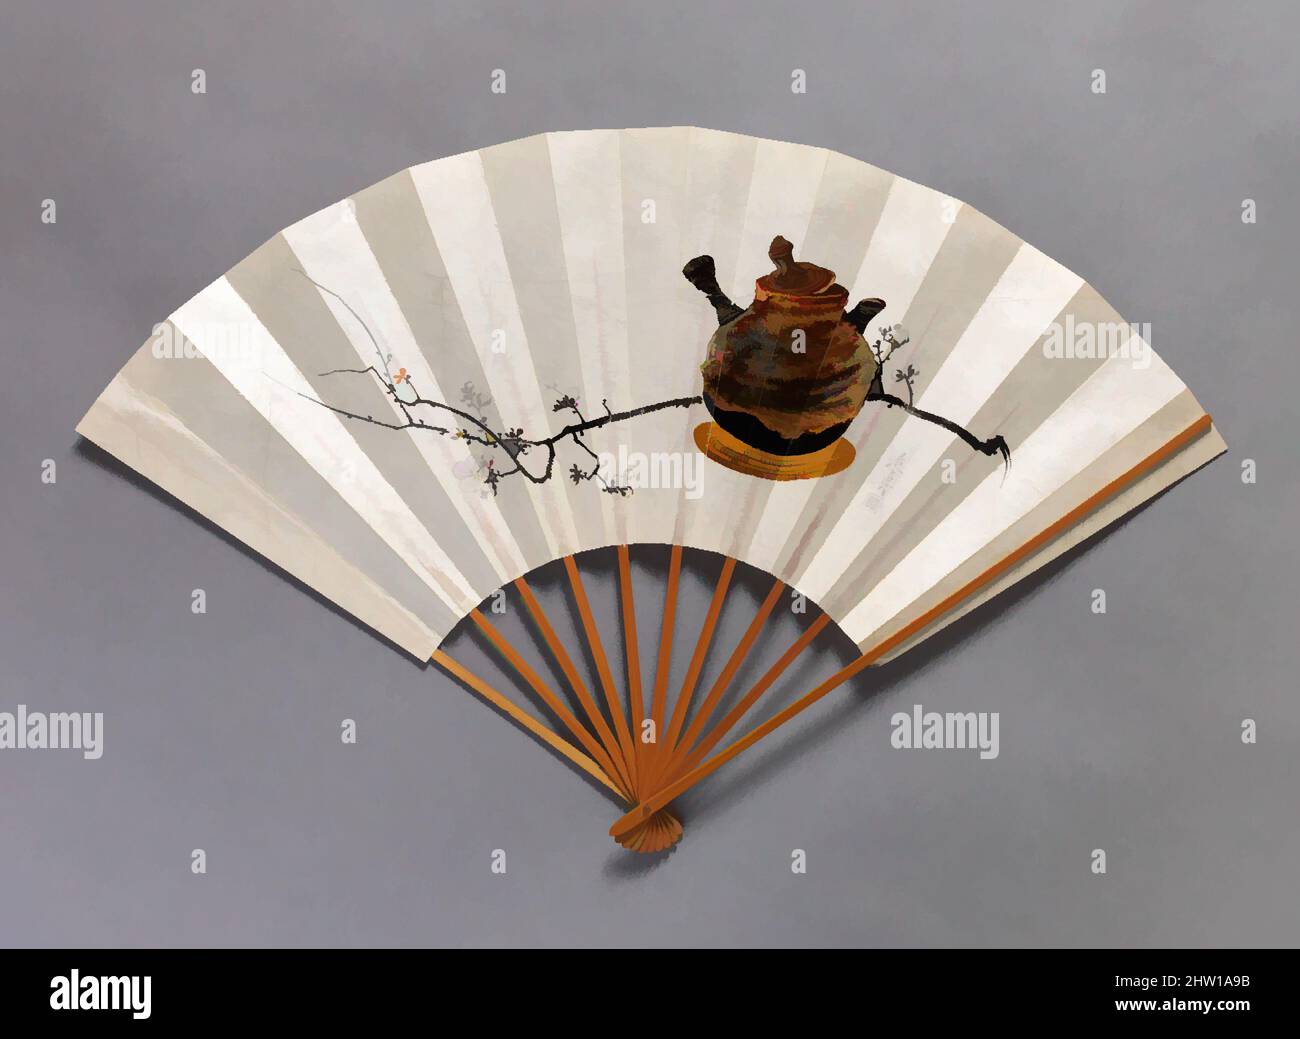 Folding Processional Icon in the Shape of a Fan